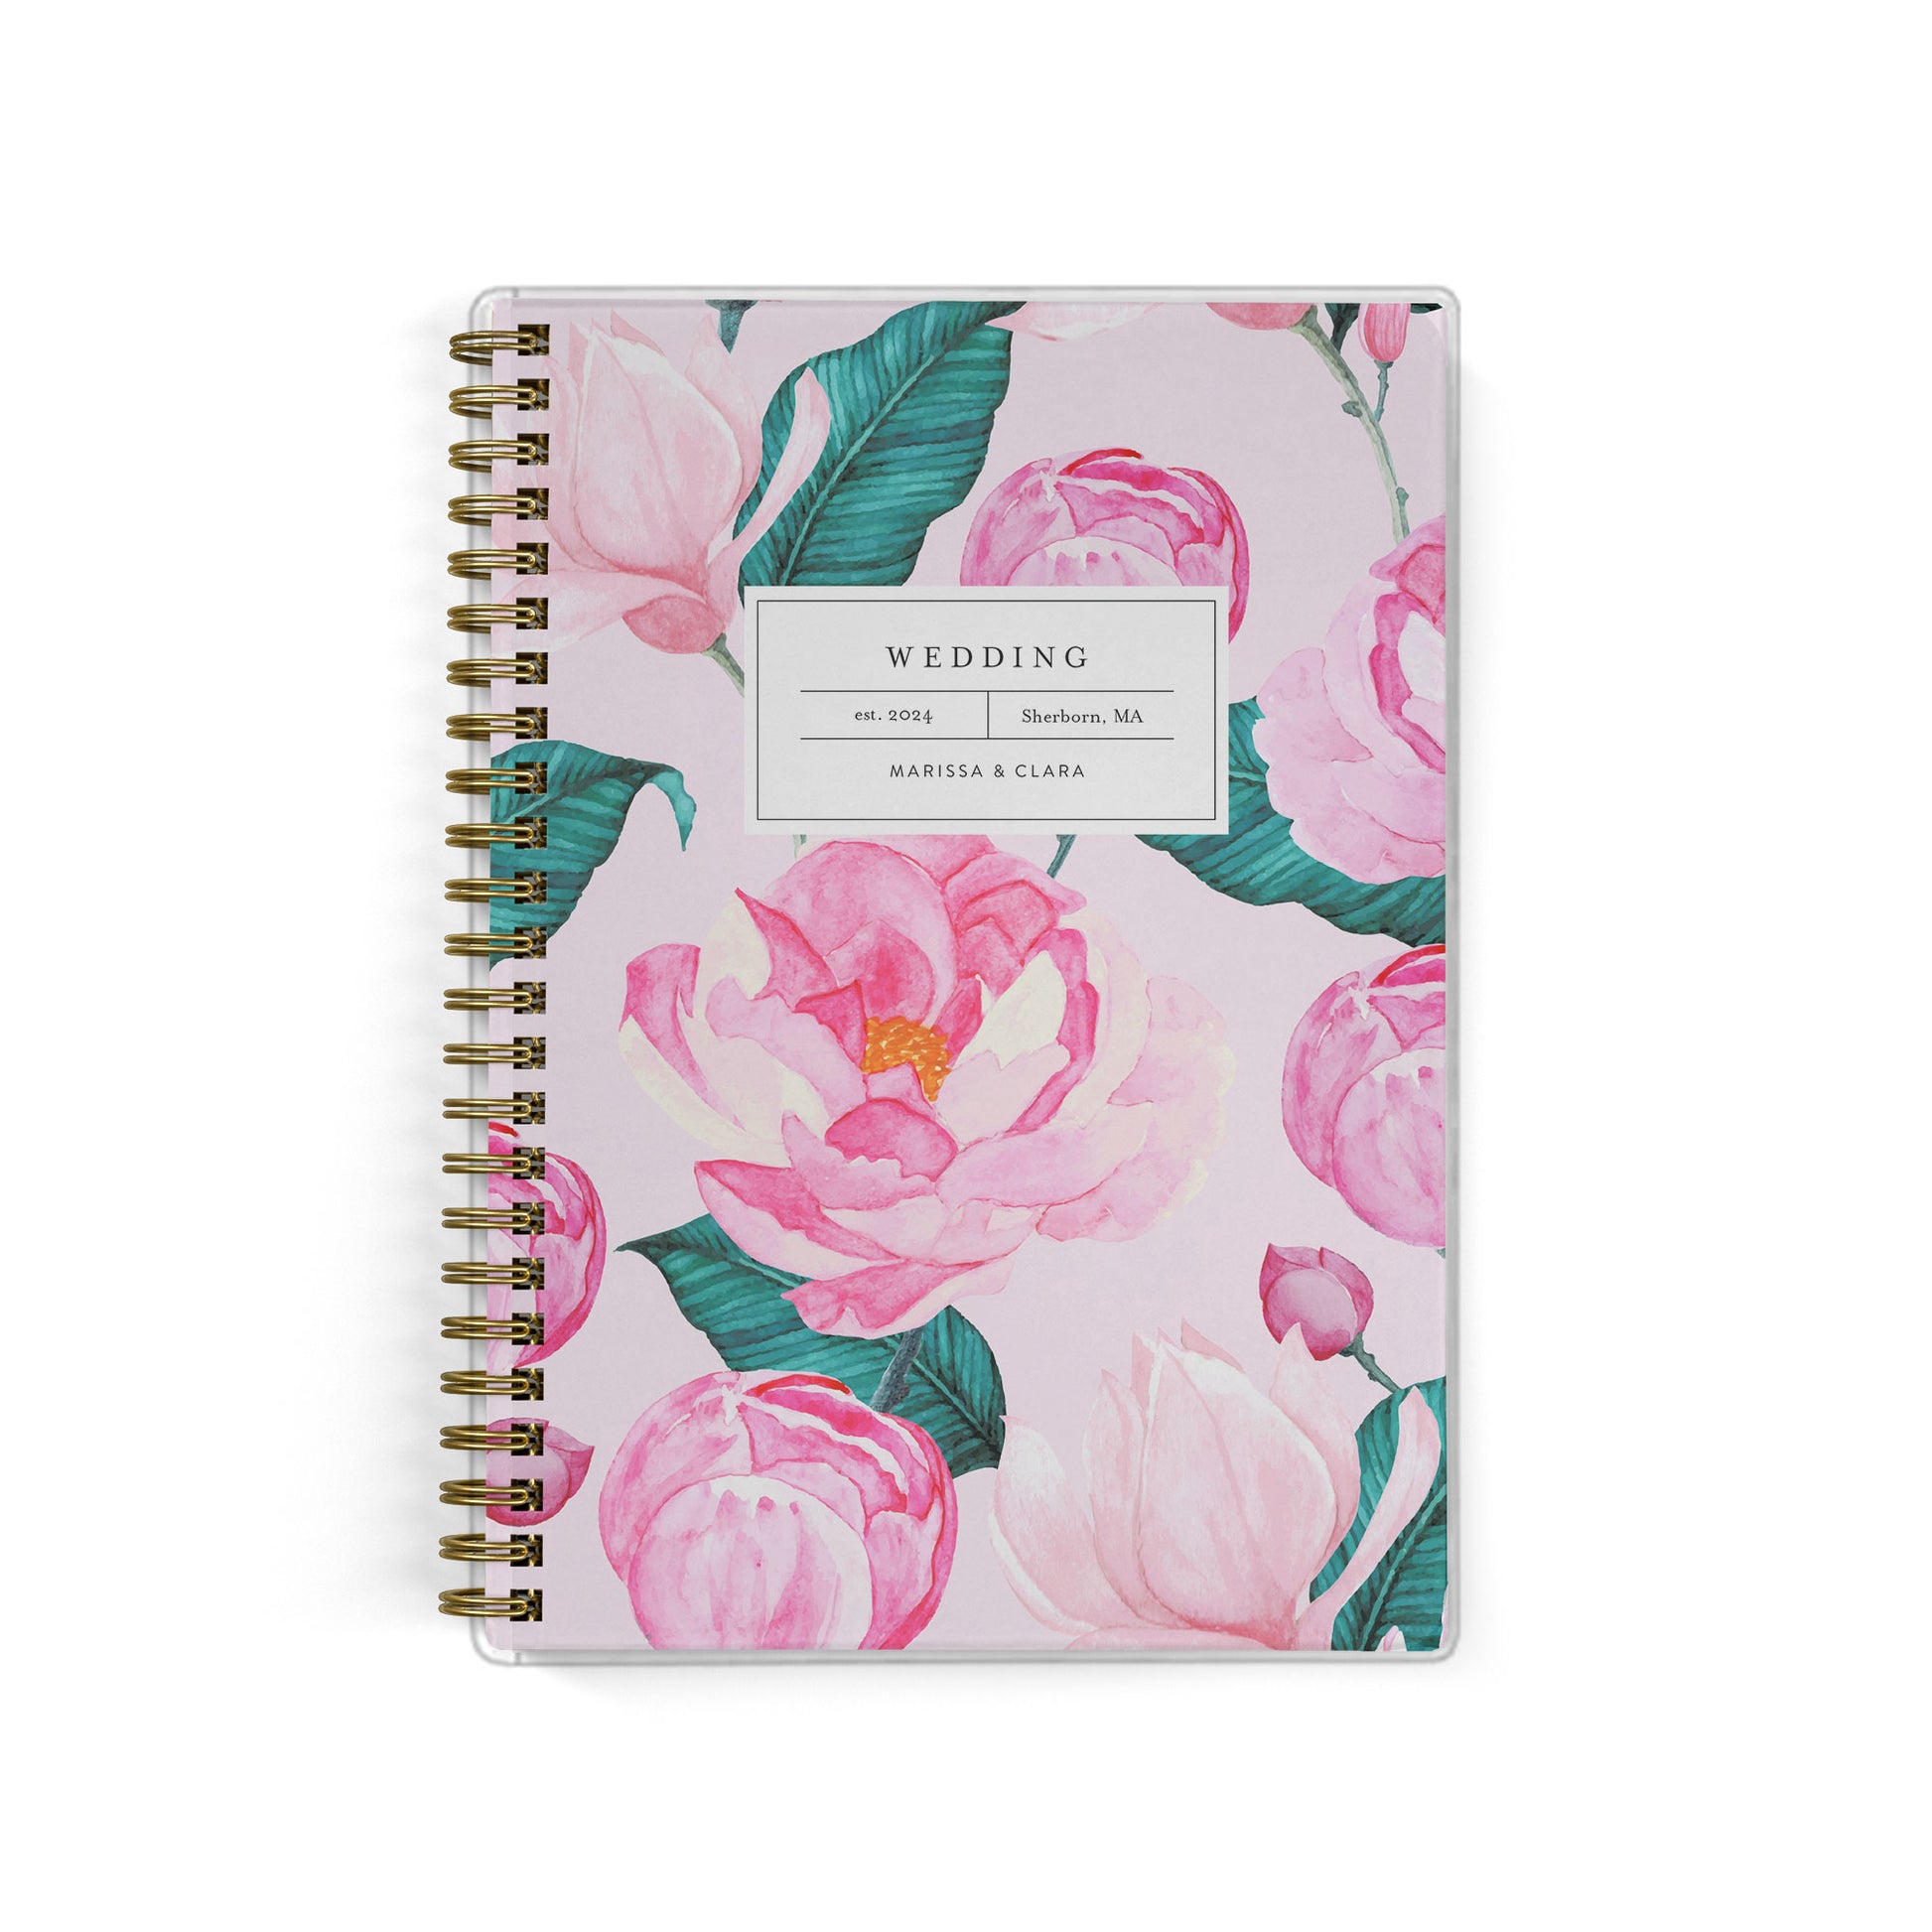 Our inclusive gender-neutral LGBT Mini Wedding Planners are perfect for planning a small wedding or elopement, shown in a pink peonies print